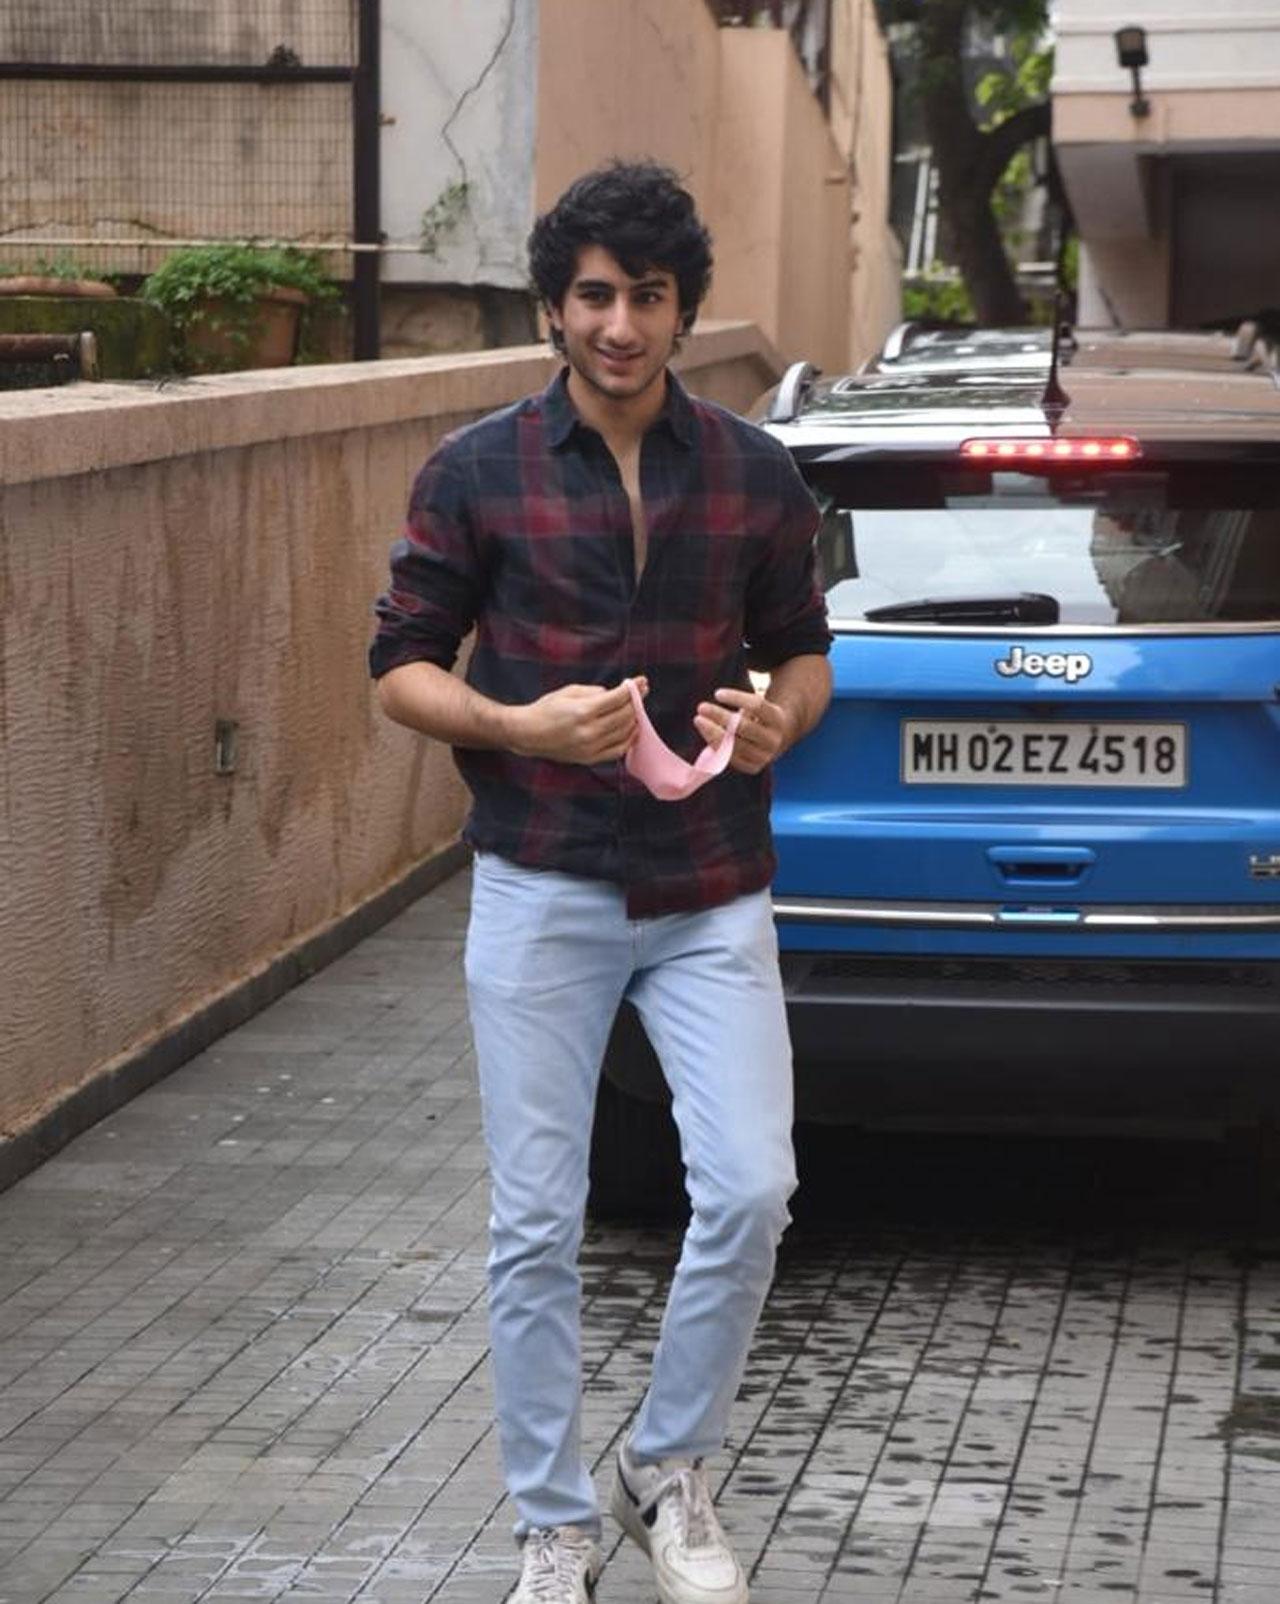 Chic Trend: Get Ranbir Kapoor's Rockstar look (guide for both guys and  girls)